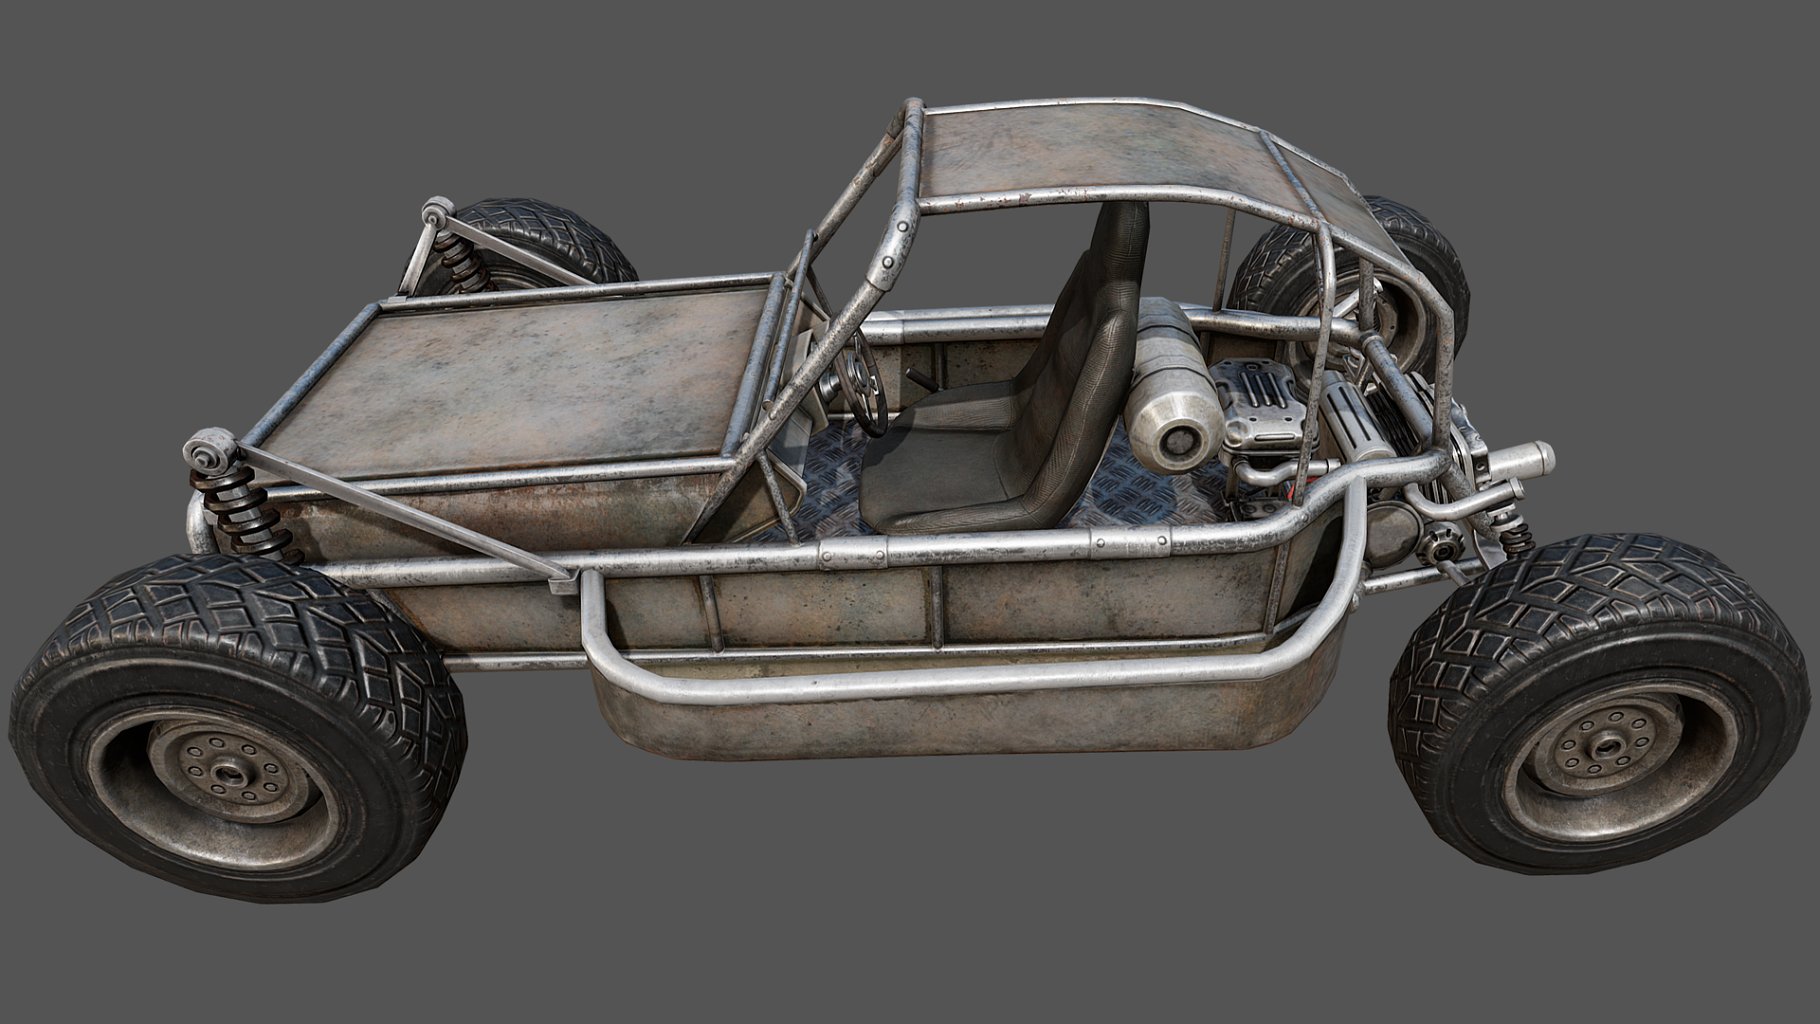 Buggy pbr mockup in the right side.